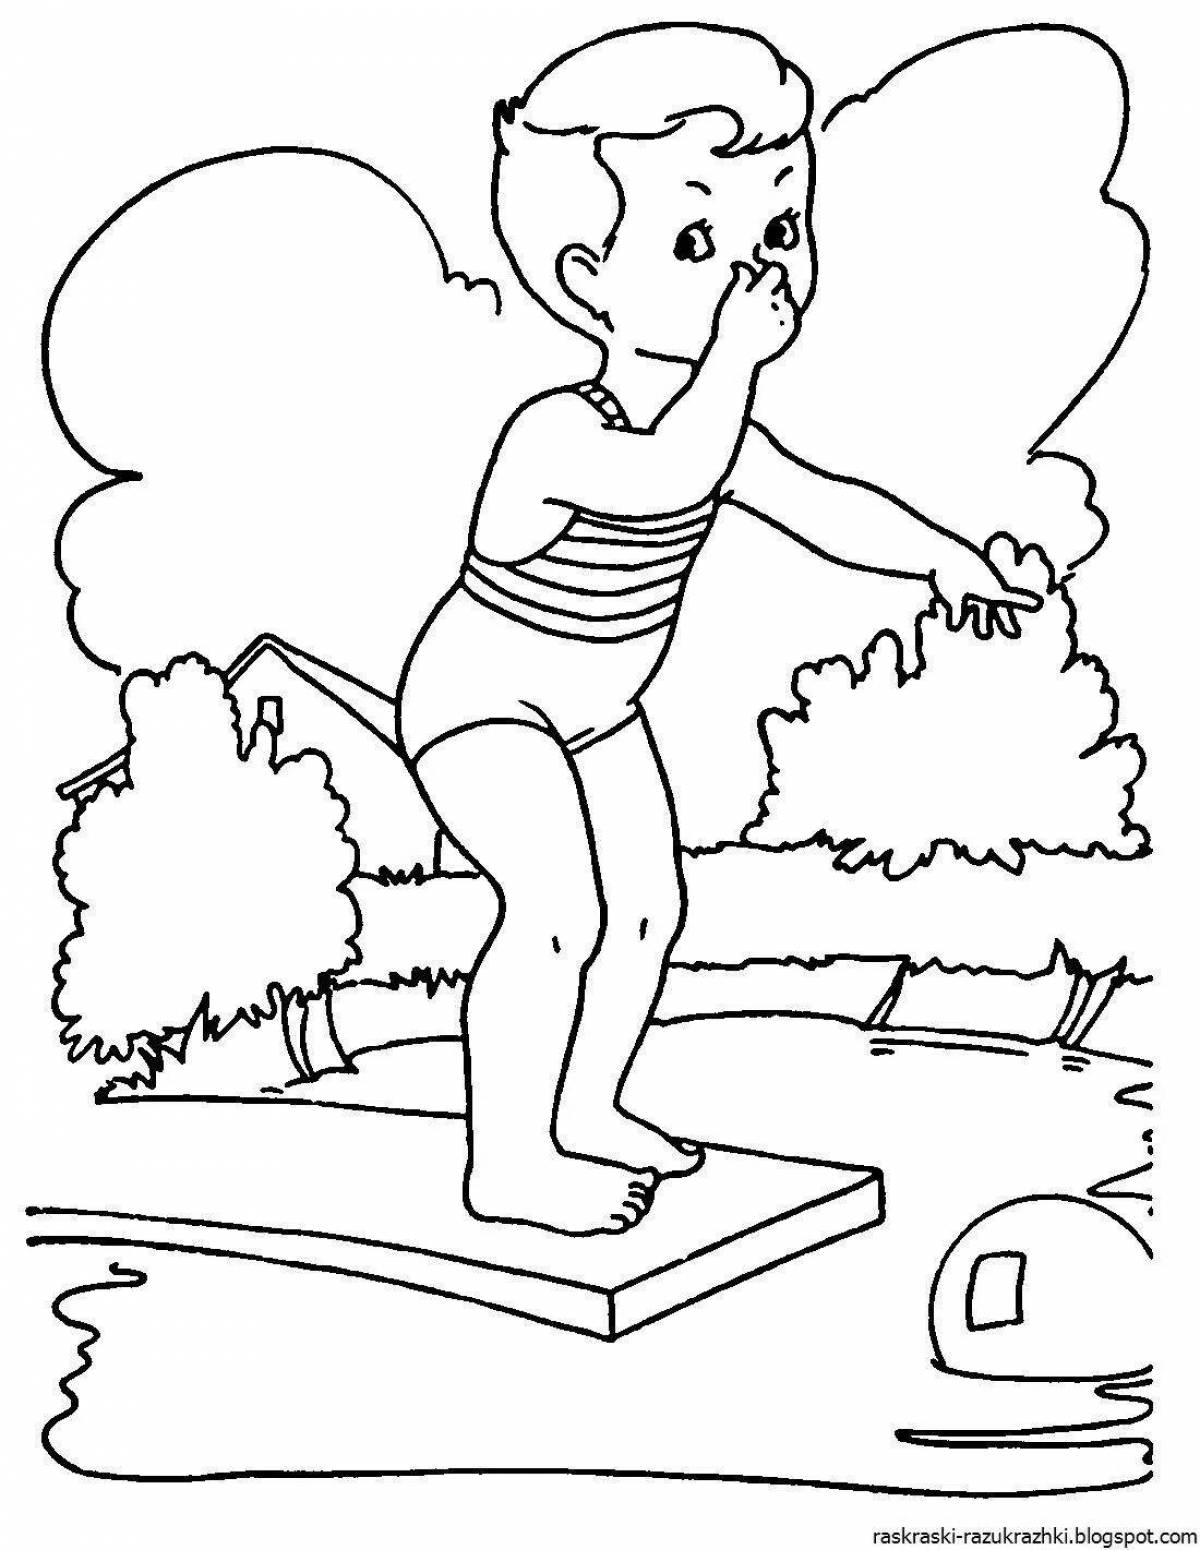 Delightful coloring of a healthy mind in a healthy body for children